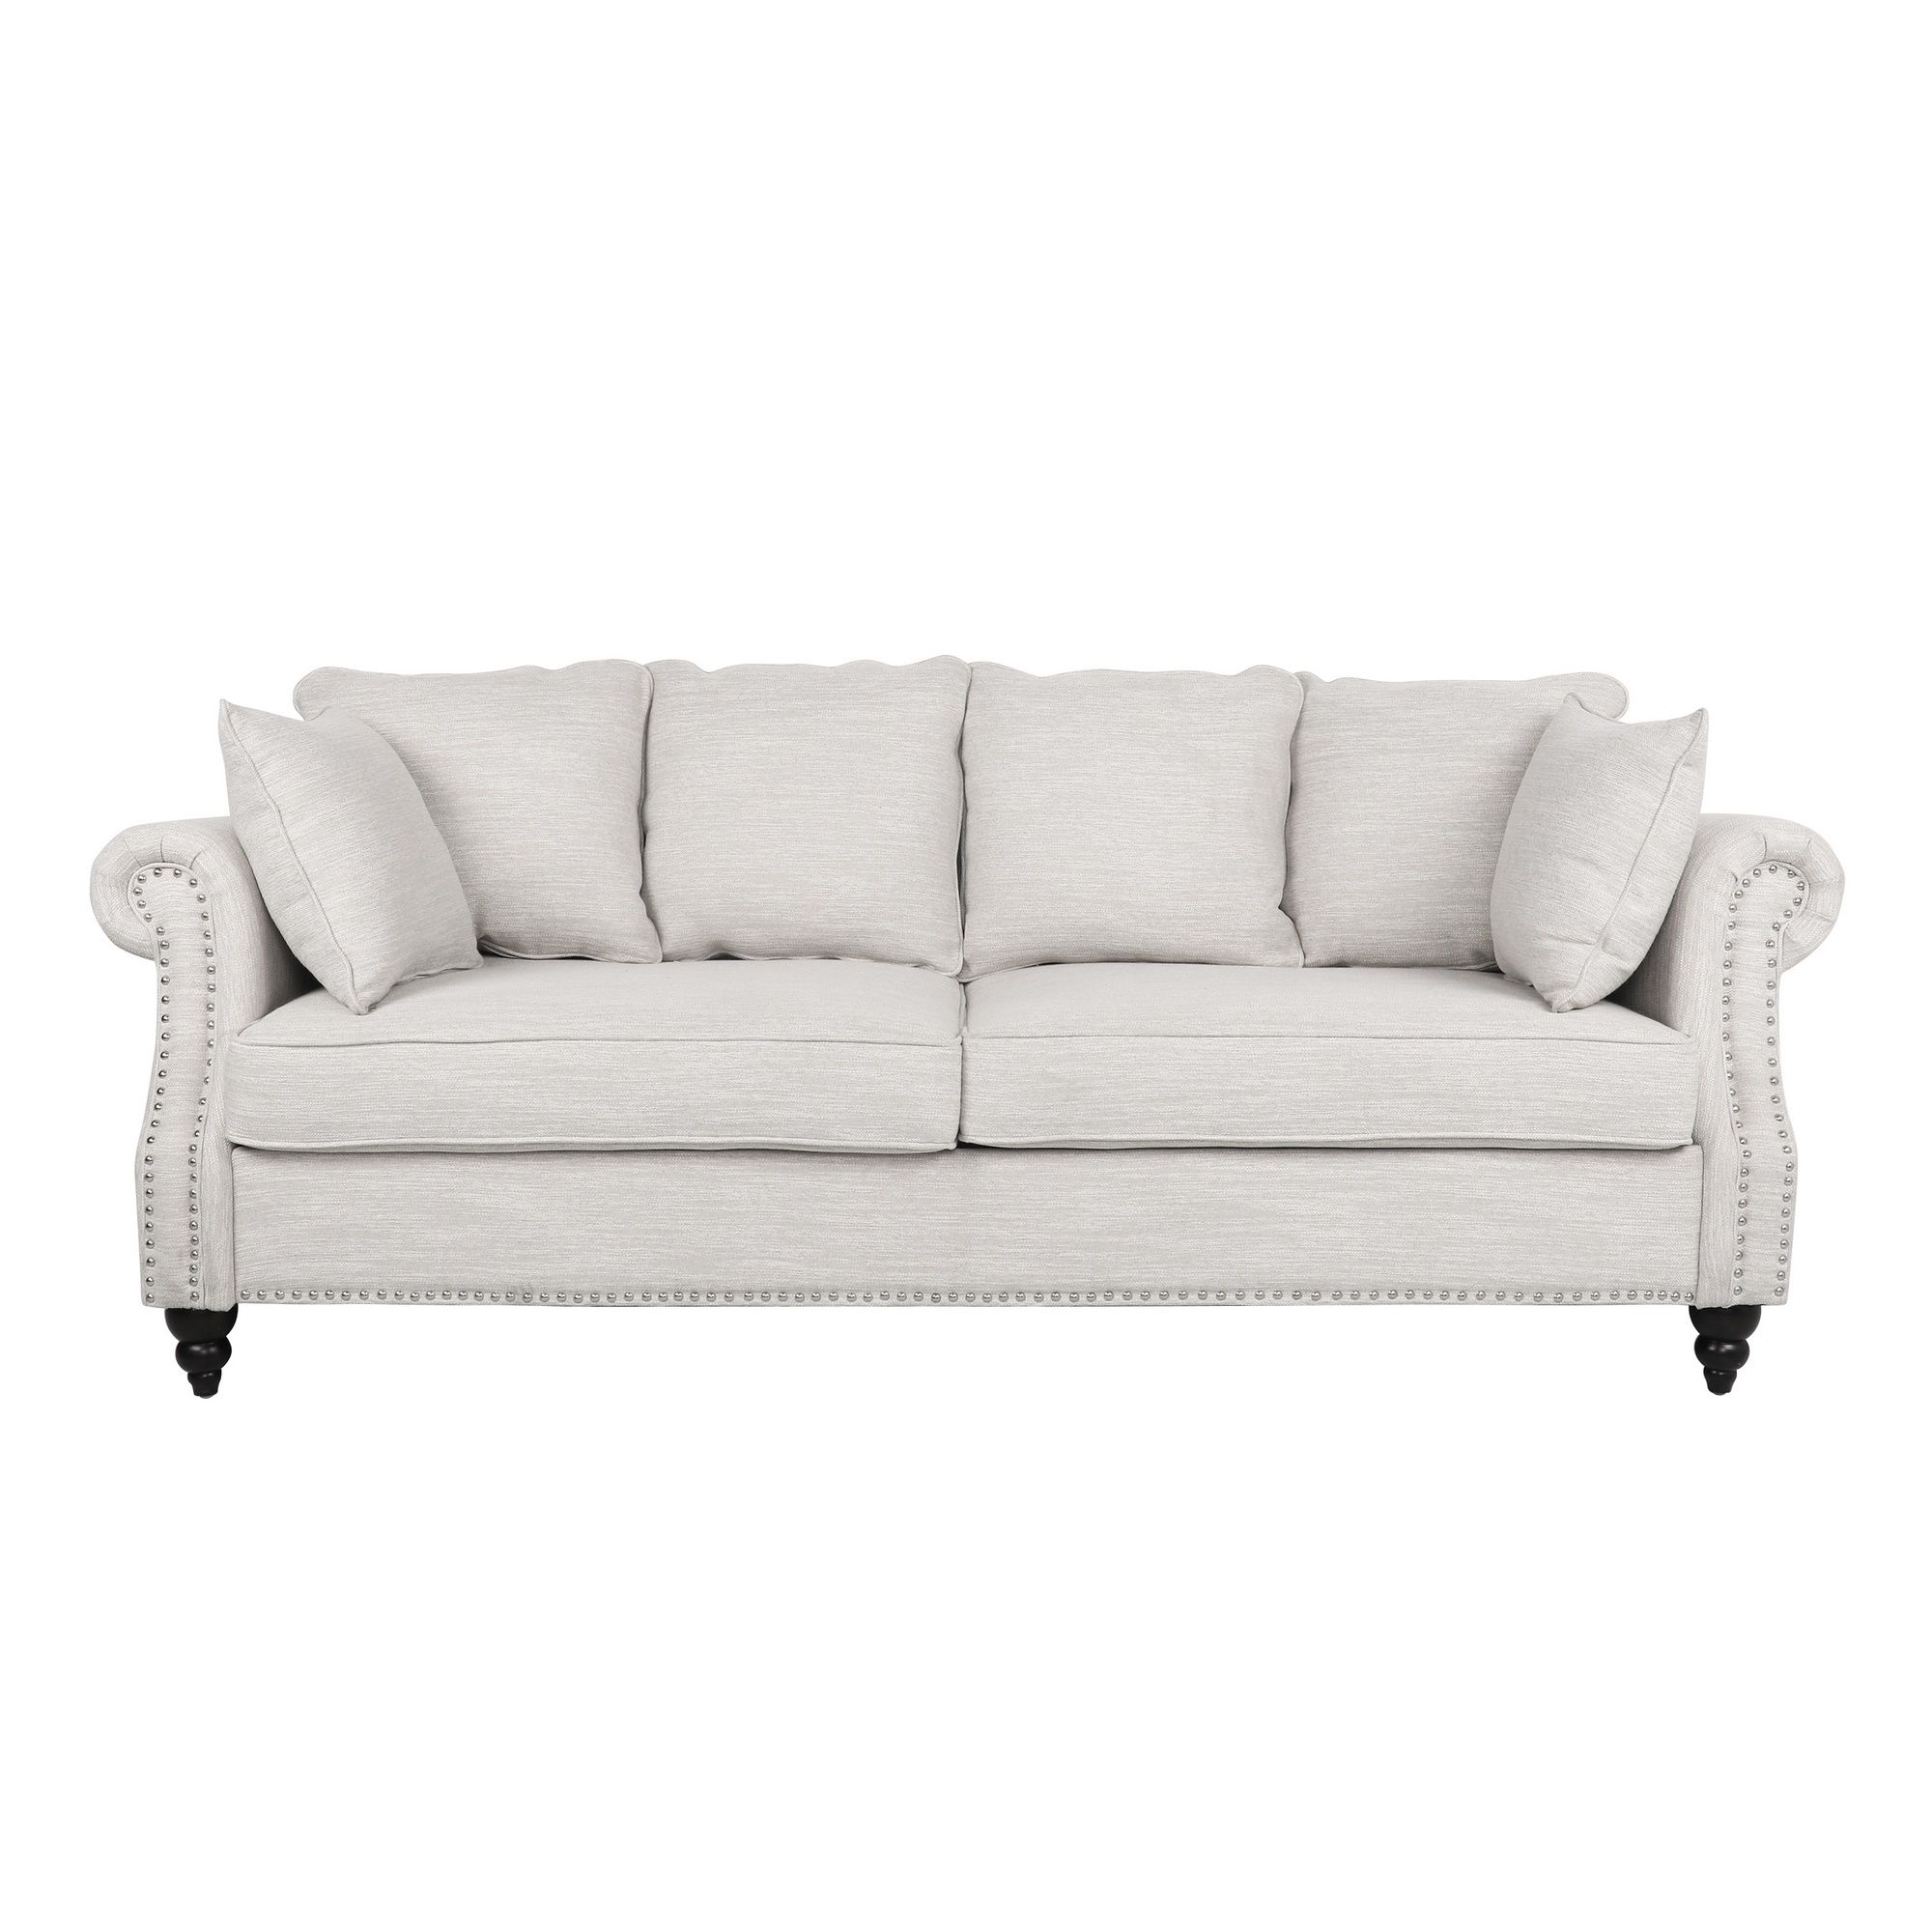 Manbow Contemporary Fabric Pillowback 3 Seater Sofa With Nailhead Trim,  Beige And Dark Brown With Sofas With Pillowback Wood Bases (View 15 of 15)